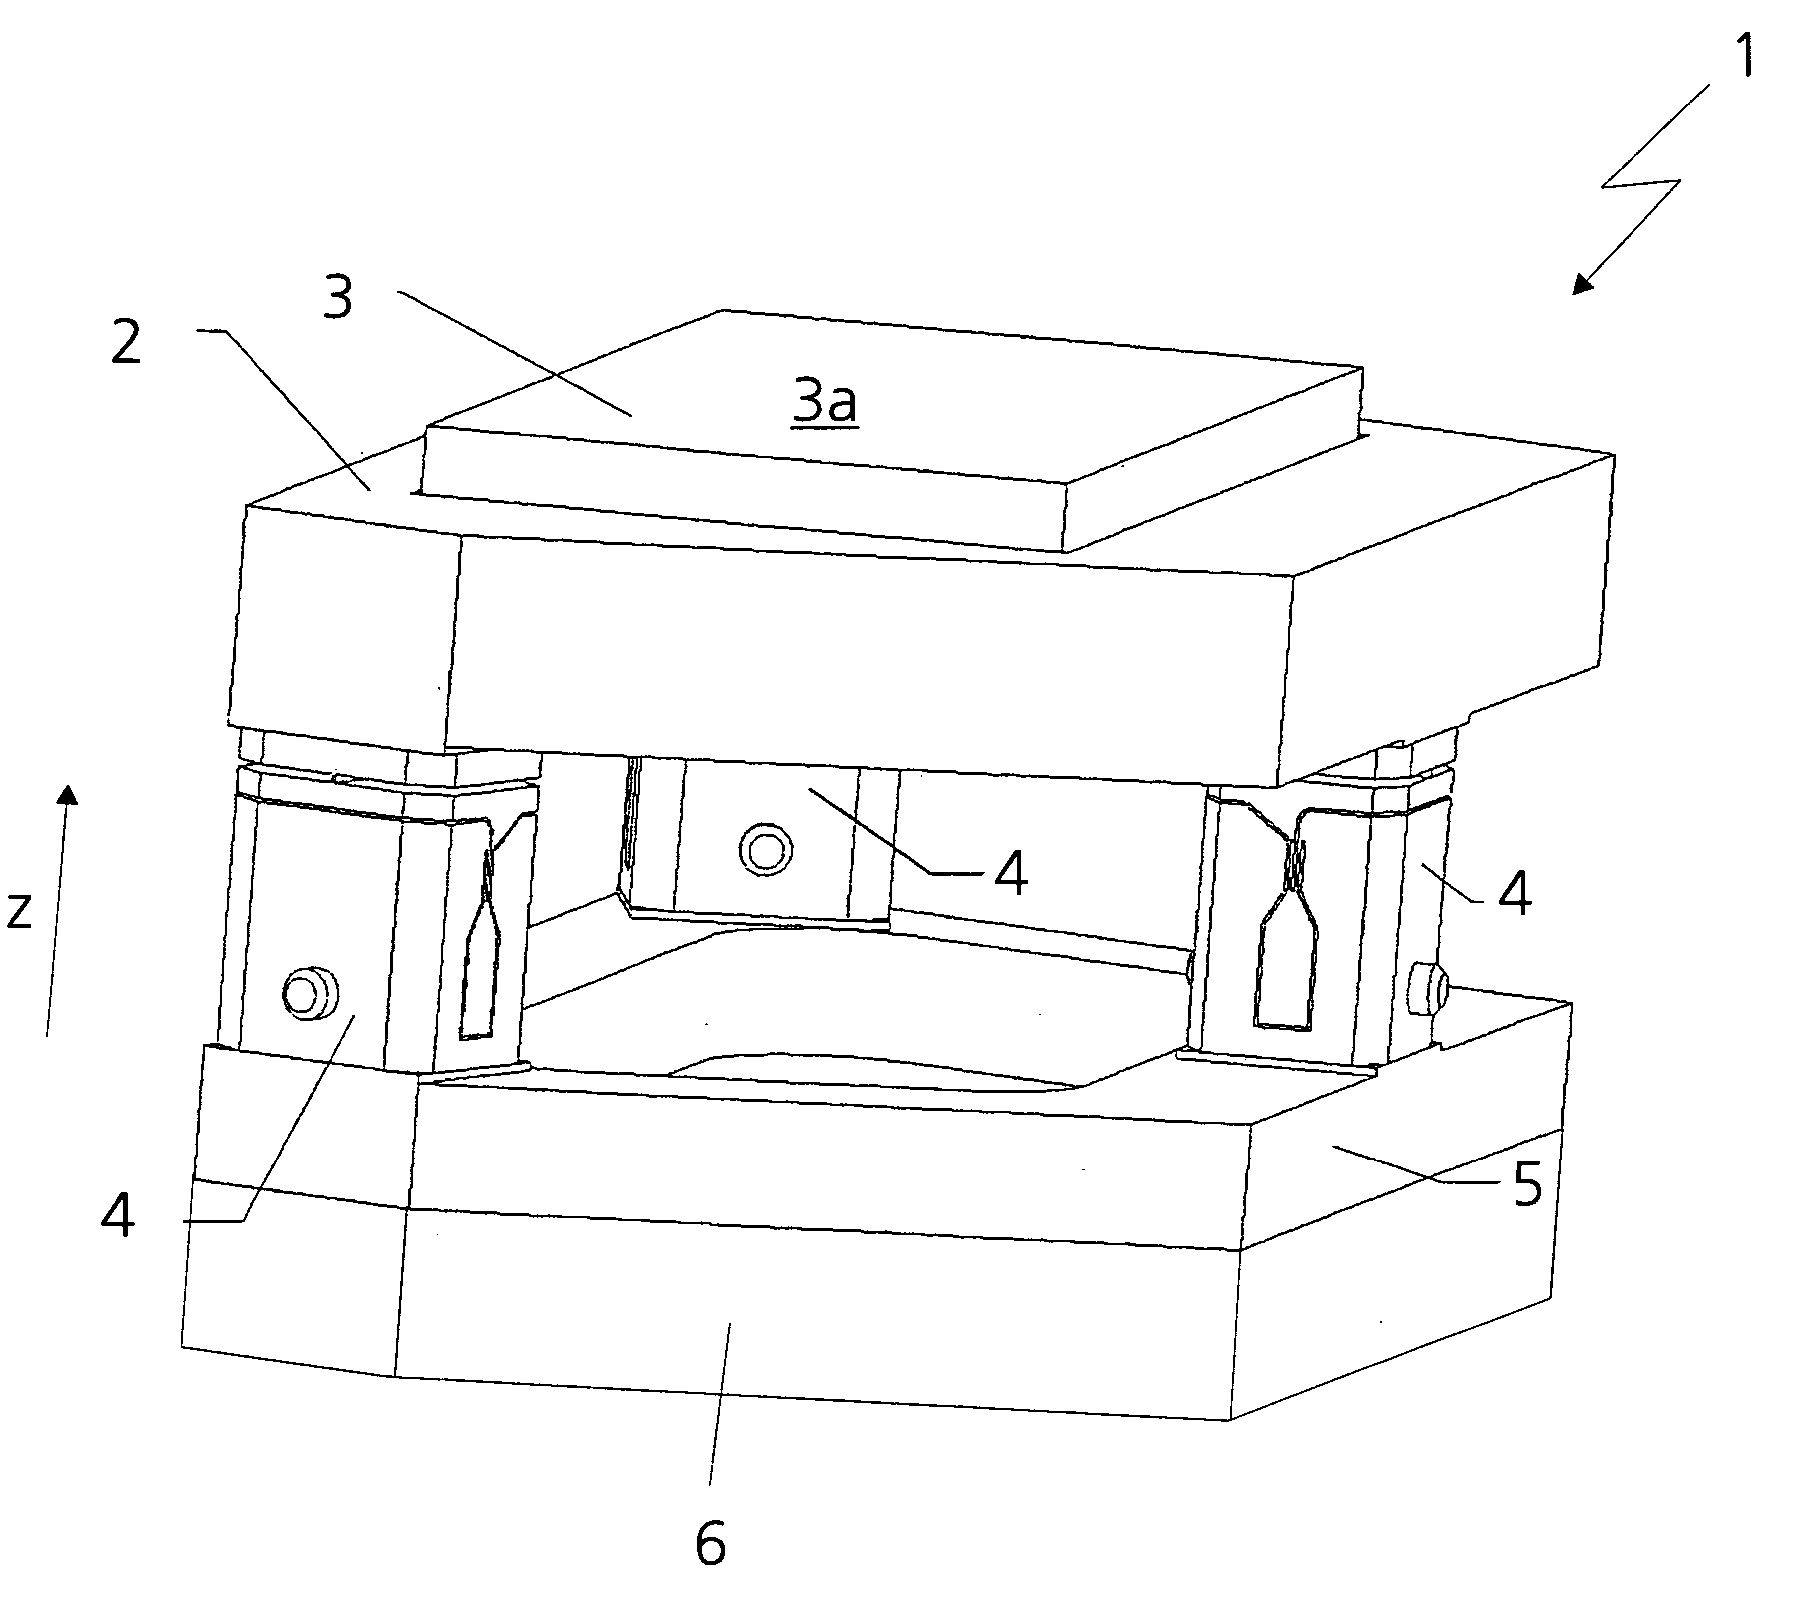 Holding and positioning apparatus for an optical element